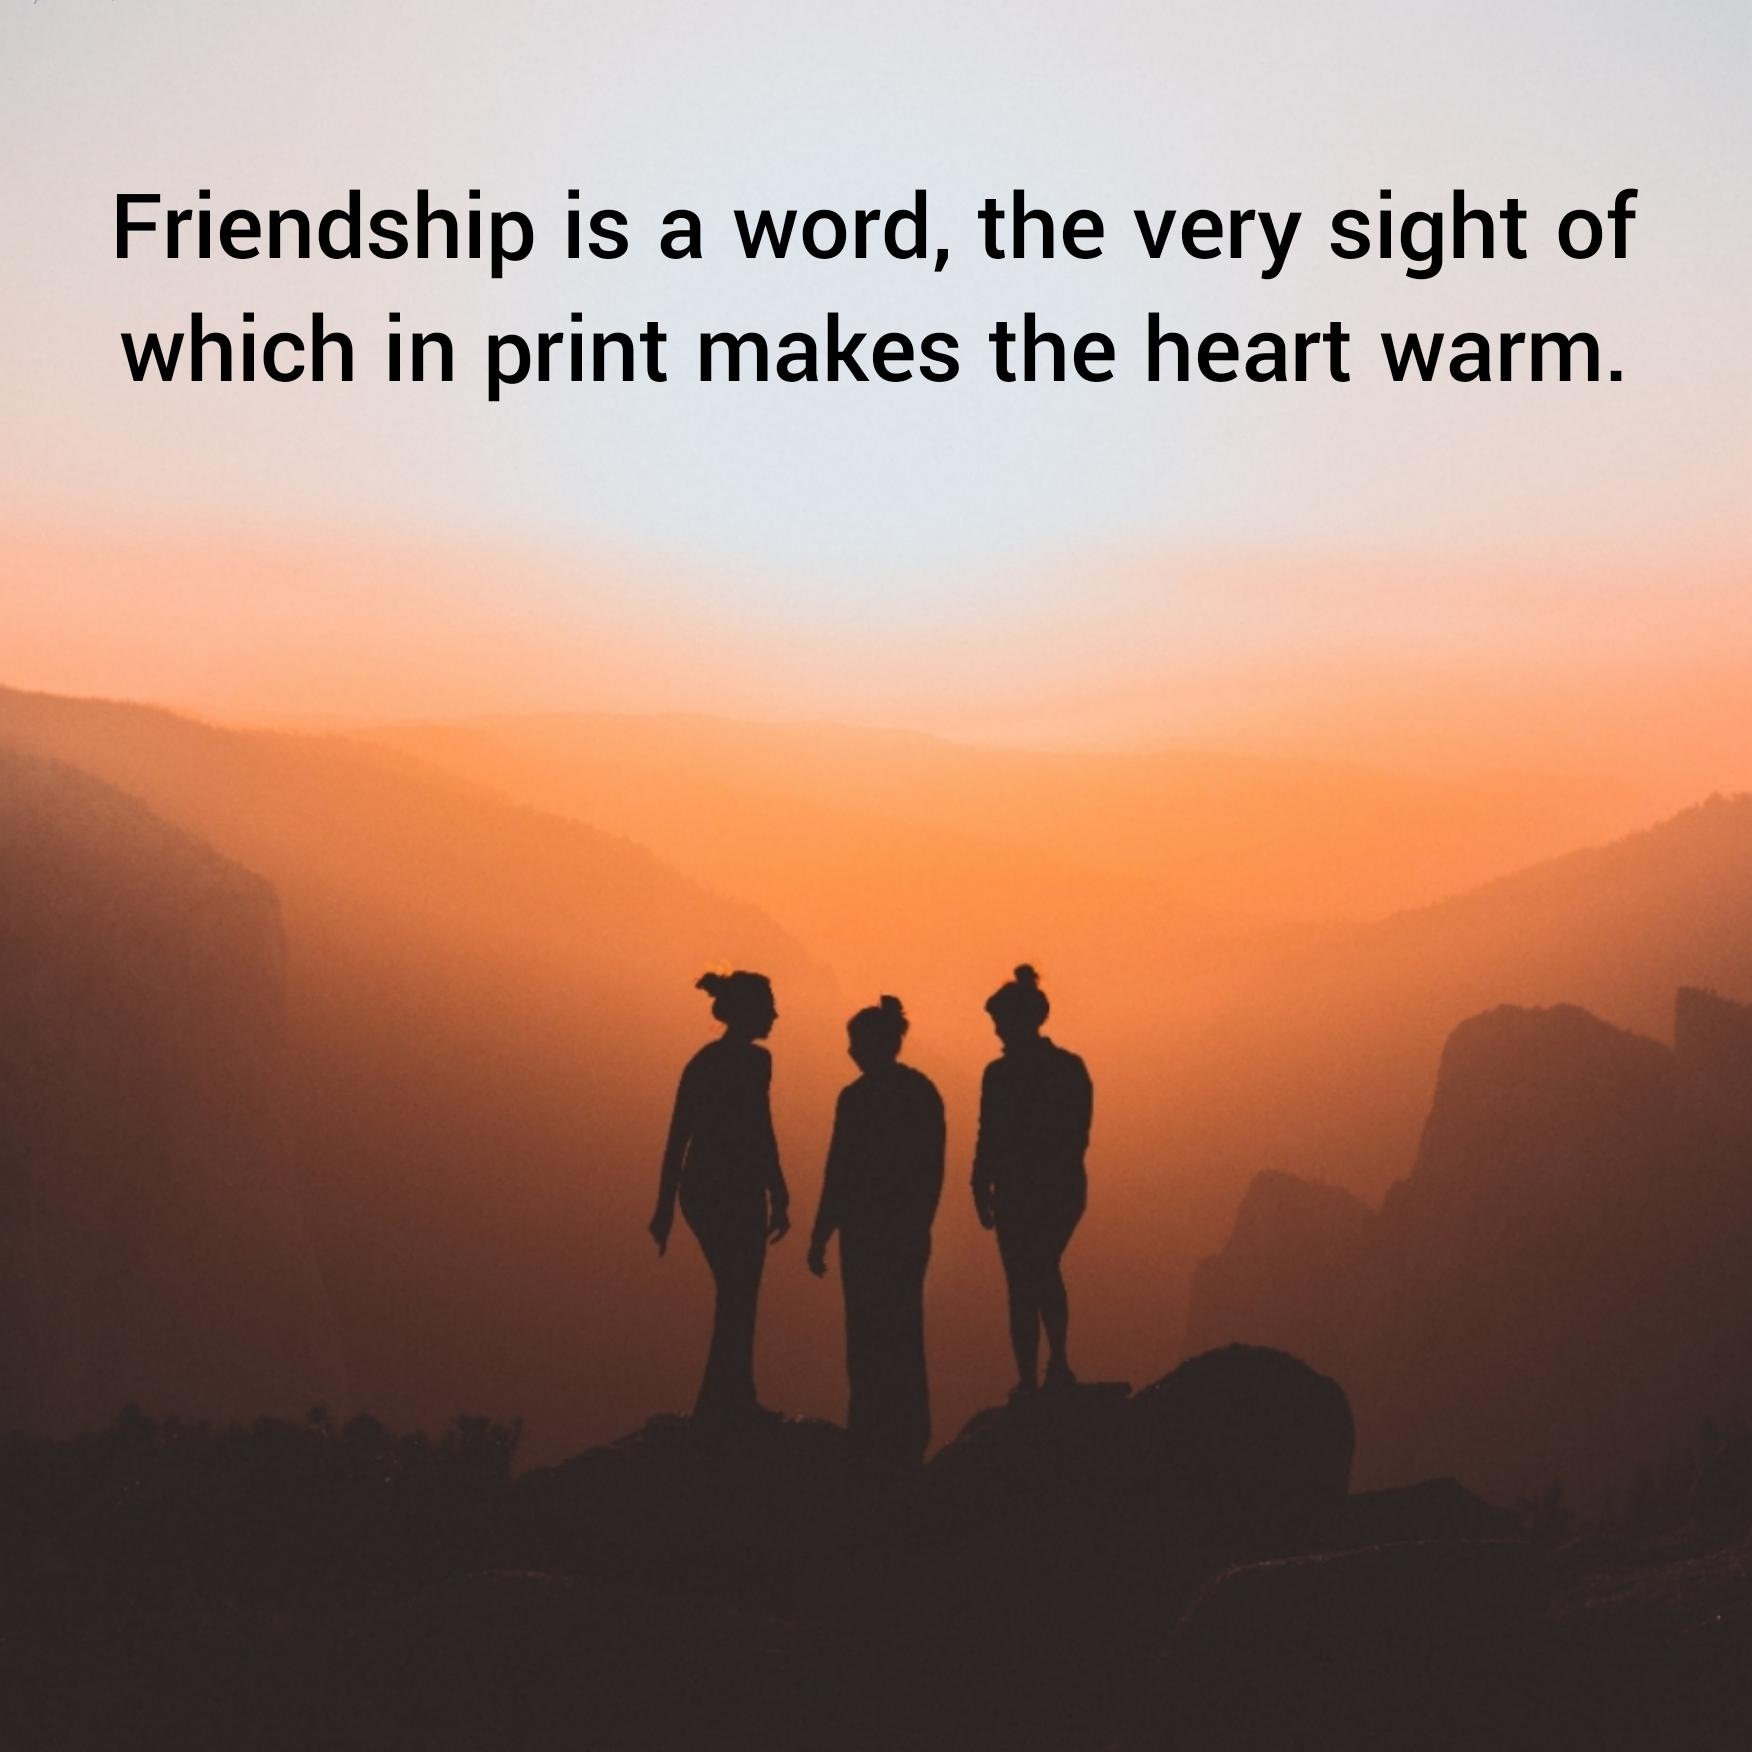 Friendship is a word the very sight of which in print makes the heart warm